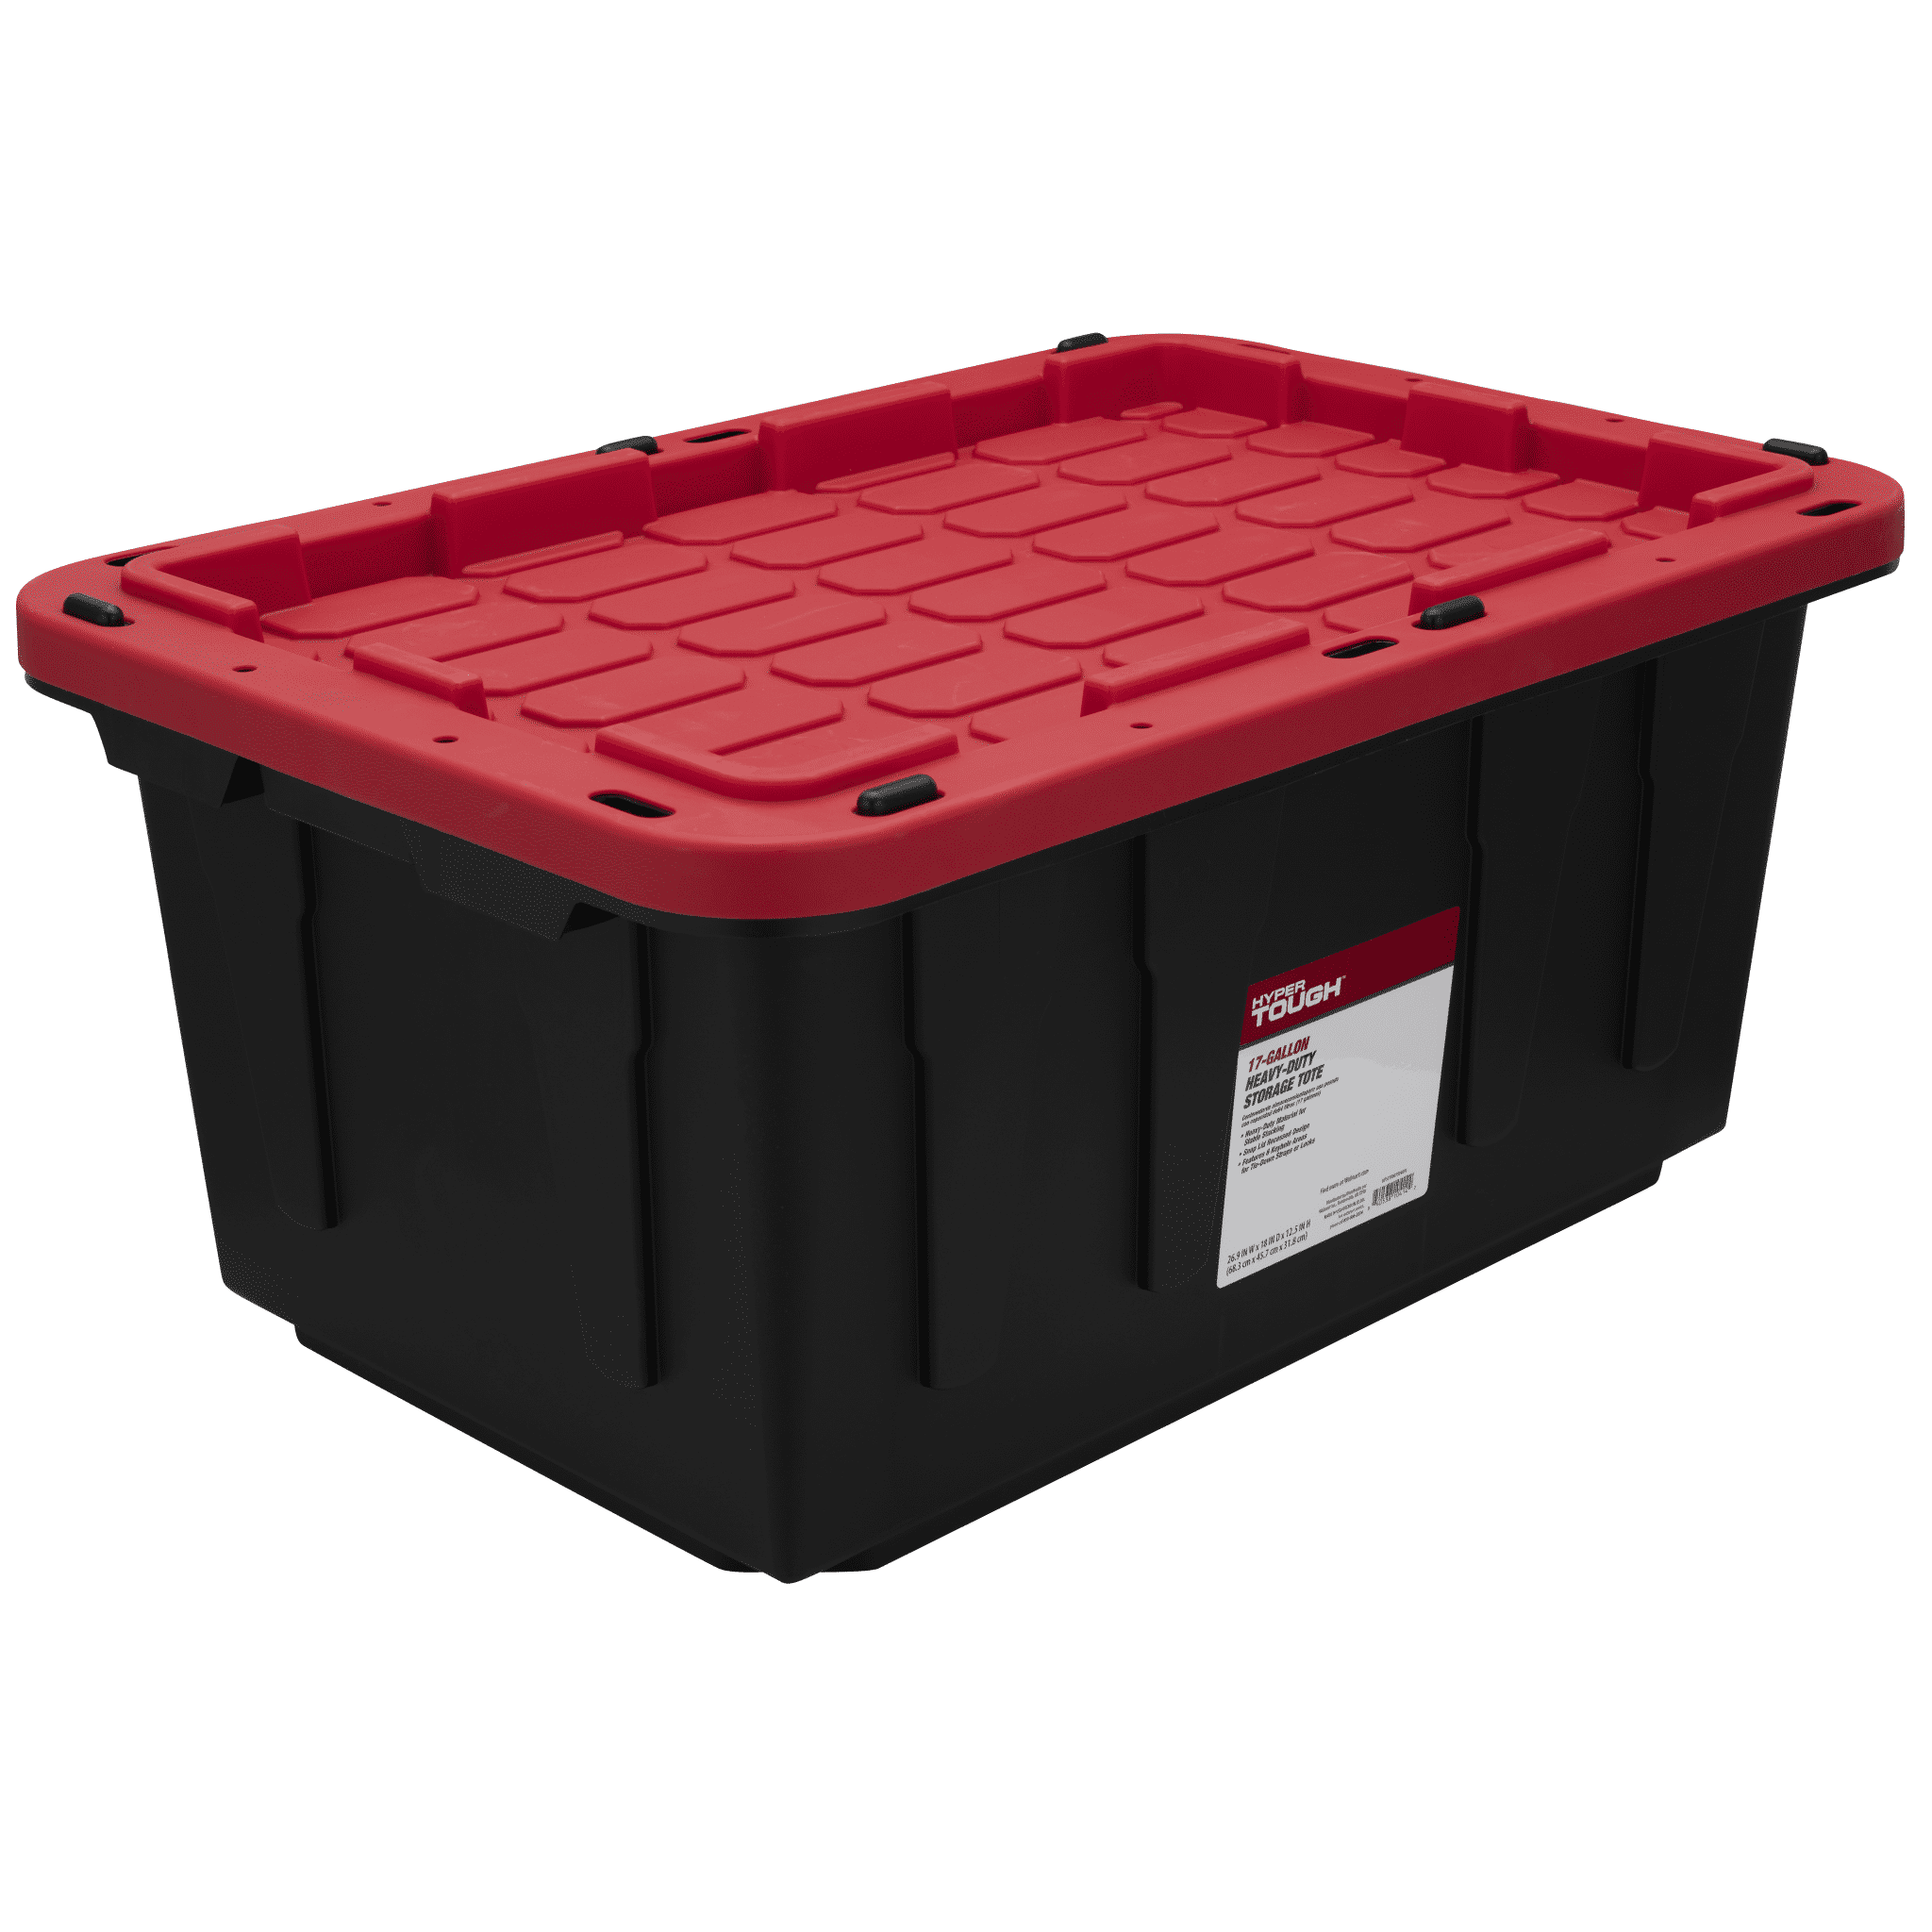 Hyper Tough 17 Gallon Snap Lid Plastic Storage Bin Container, Black with Red Lid